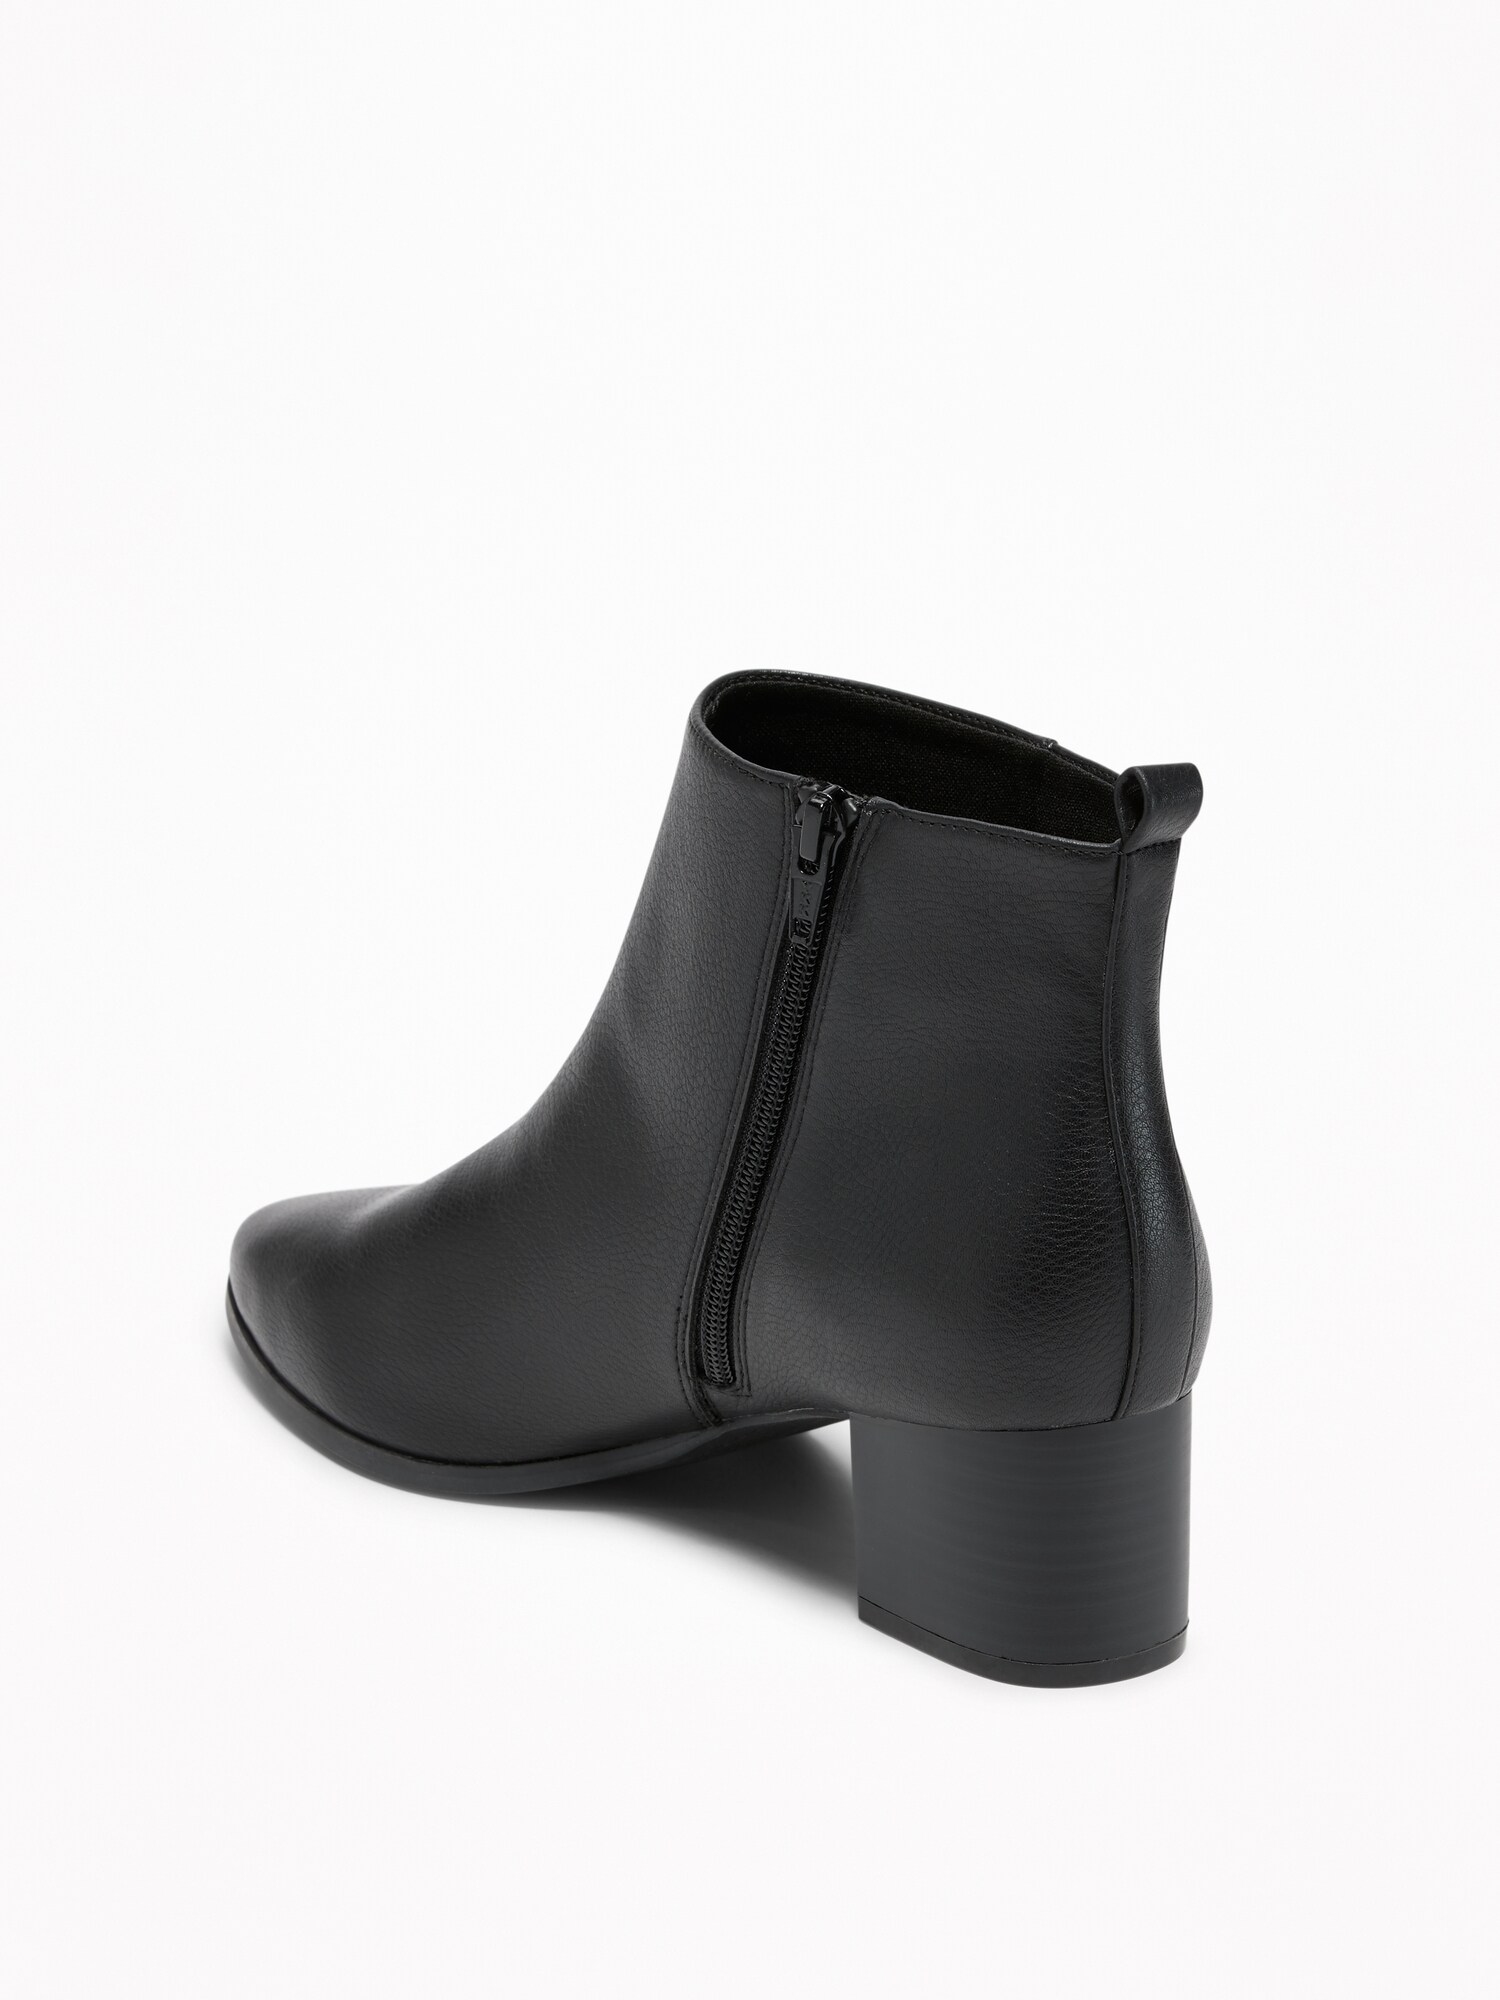 Faux-Leather Ankle Boots for Women | Old Navy